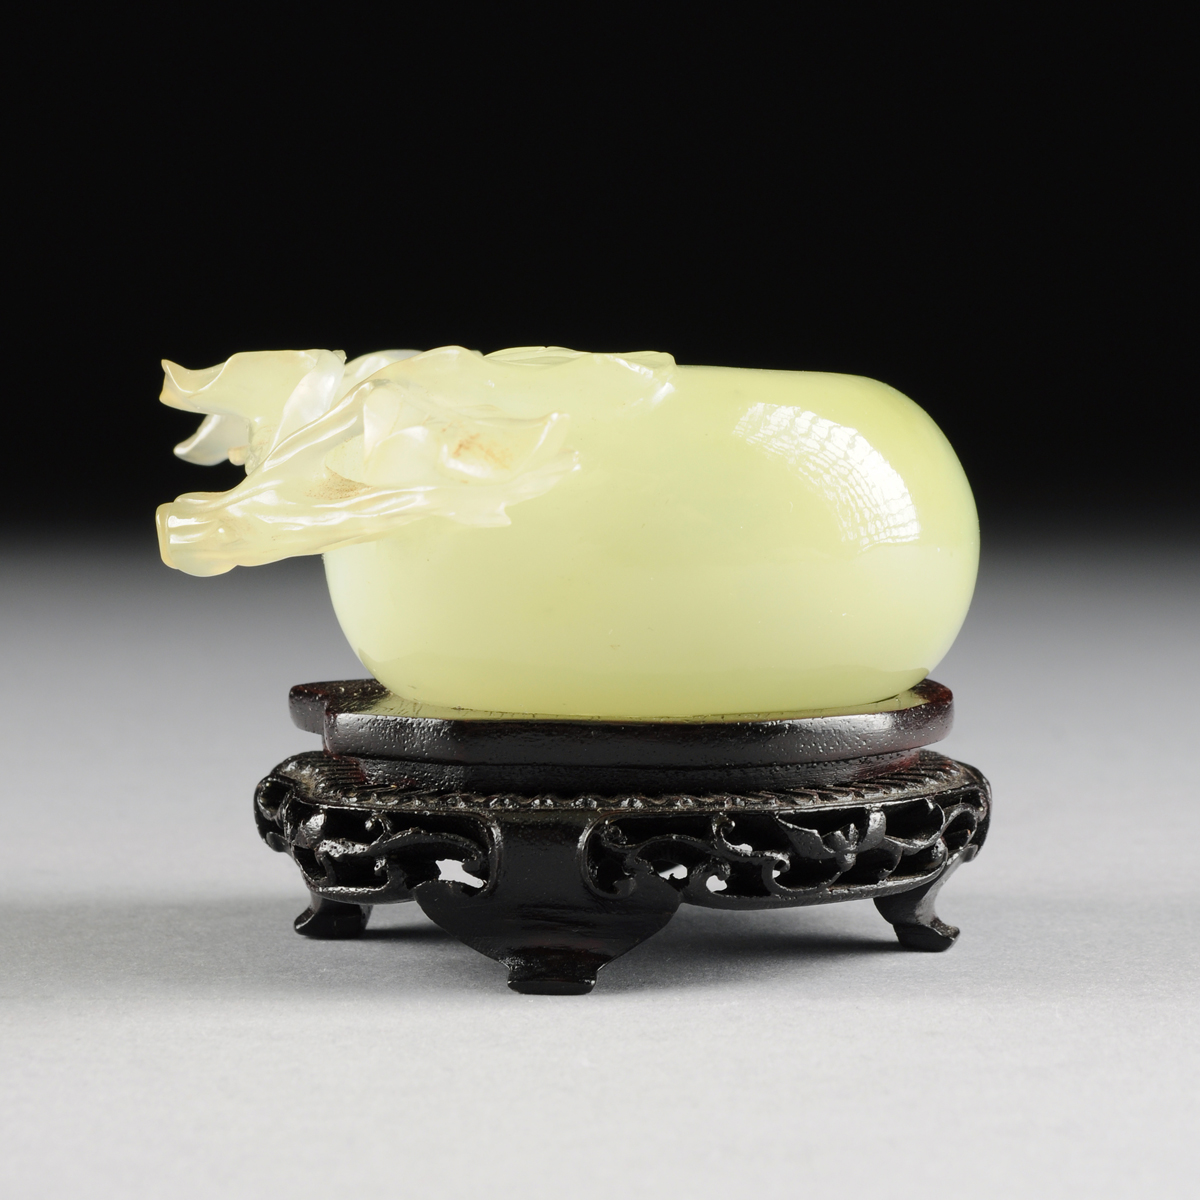 A CHINESE CARVED JADEITE BRUSH WASHER, 20TH CENTURY, in the form of a peach with leaves, of pale